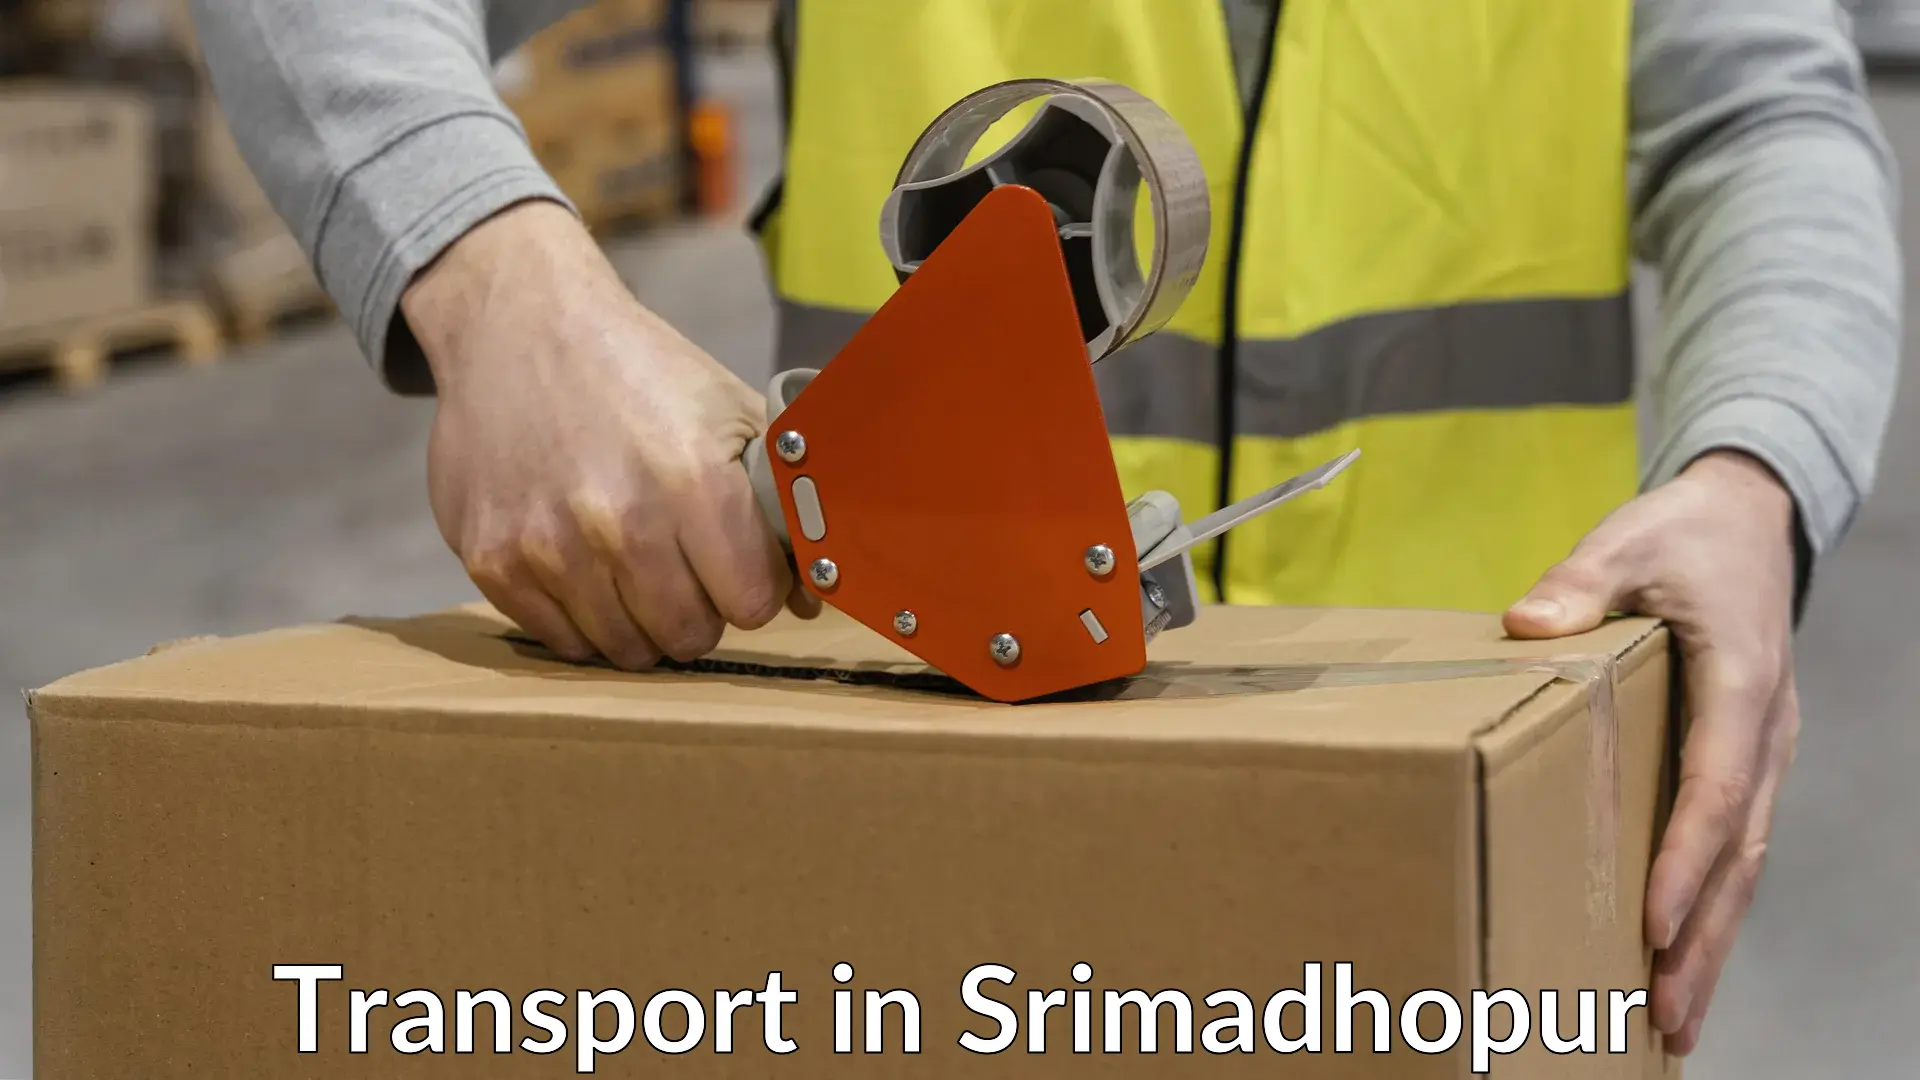 Air cargo transport services in Srimadhopur